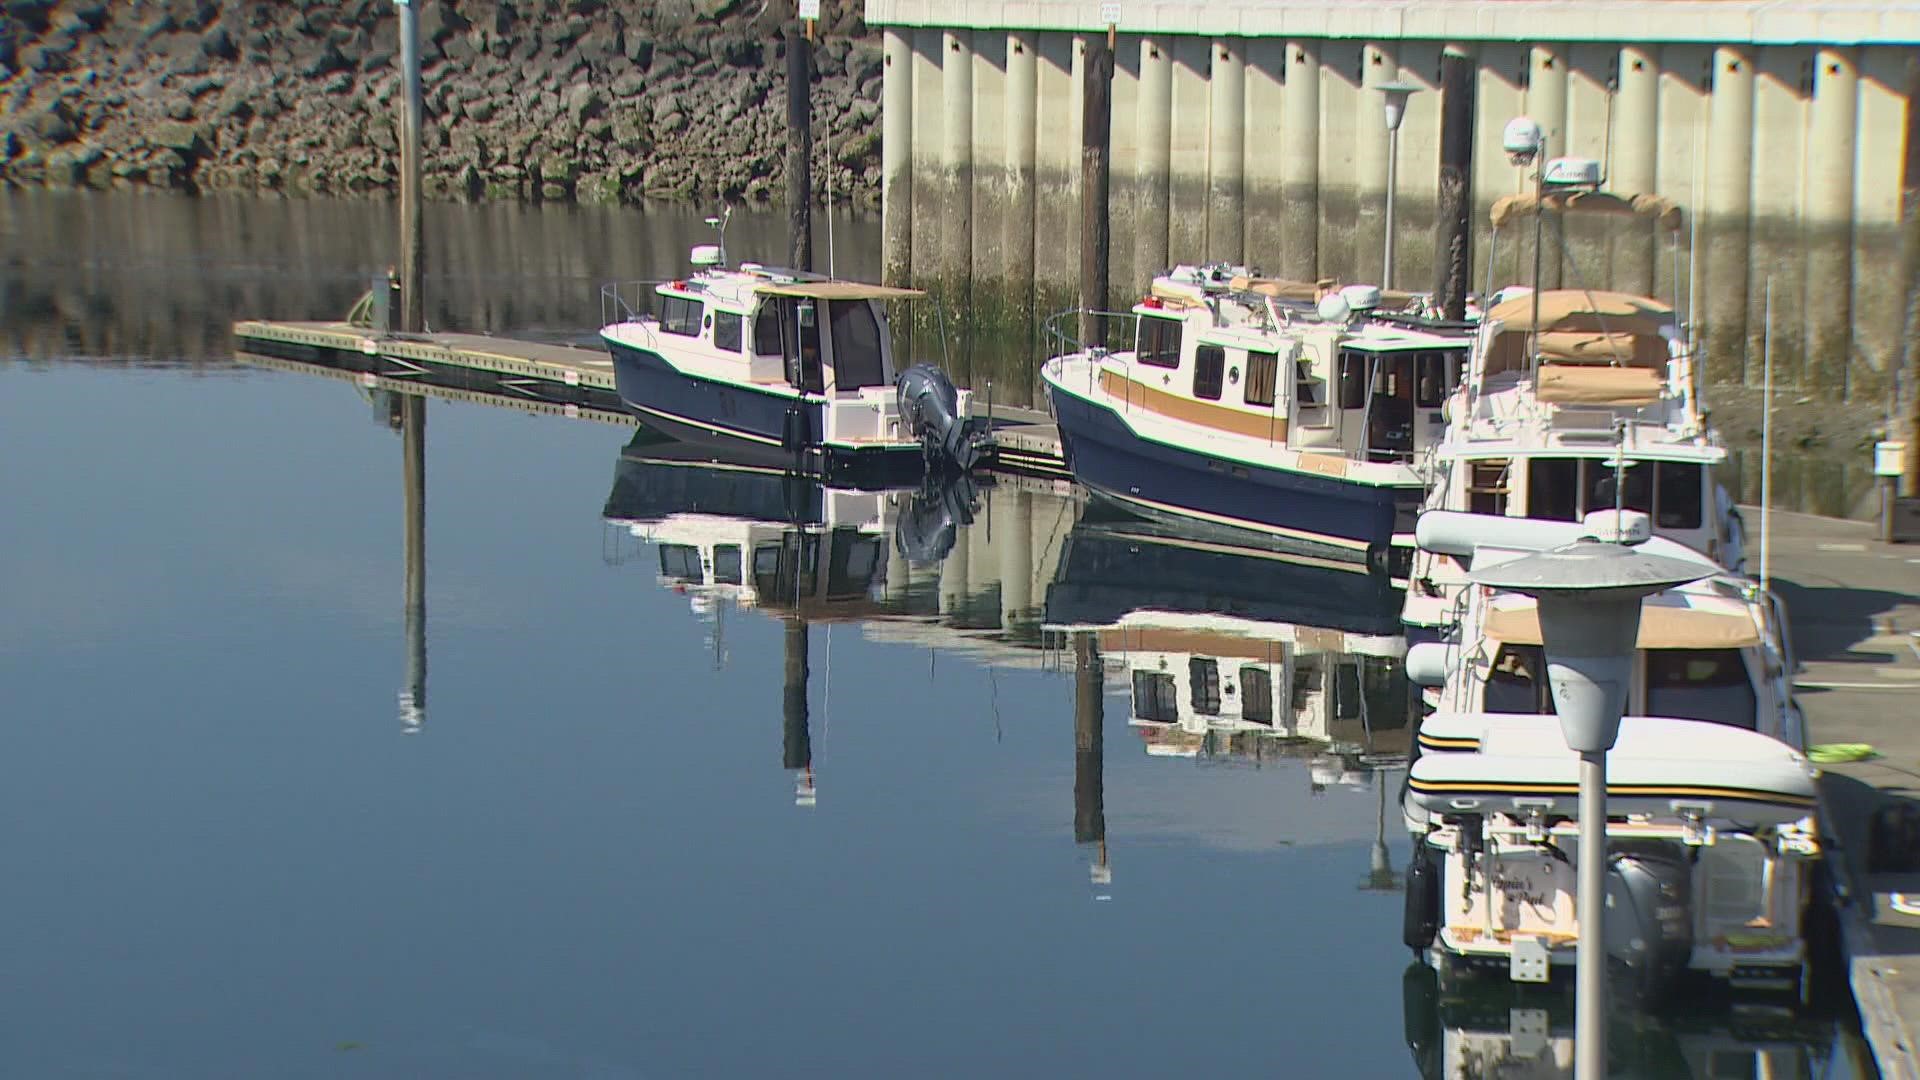 The ferry will leave Des Moines Marina and land at Bell Harbor Marina in Seattle. It’s currently a two-month pilot program to see how it’ll work for the city.